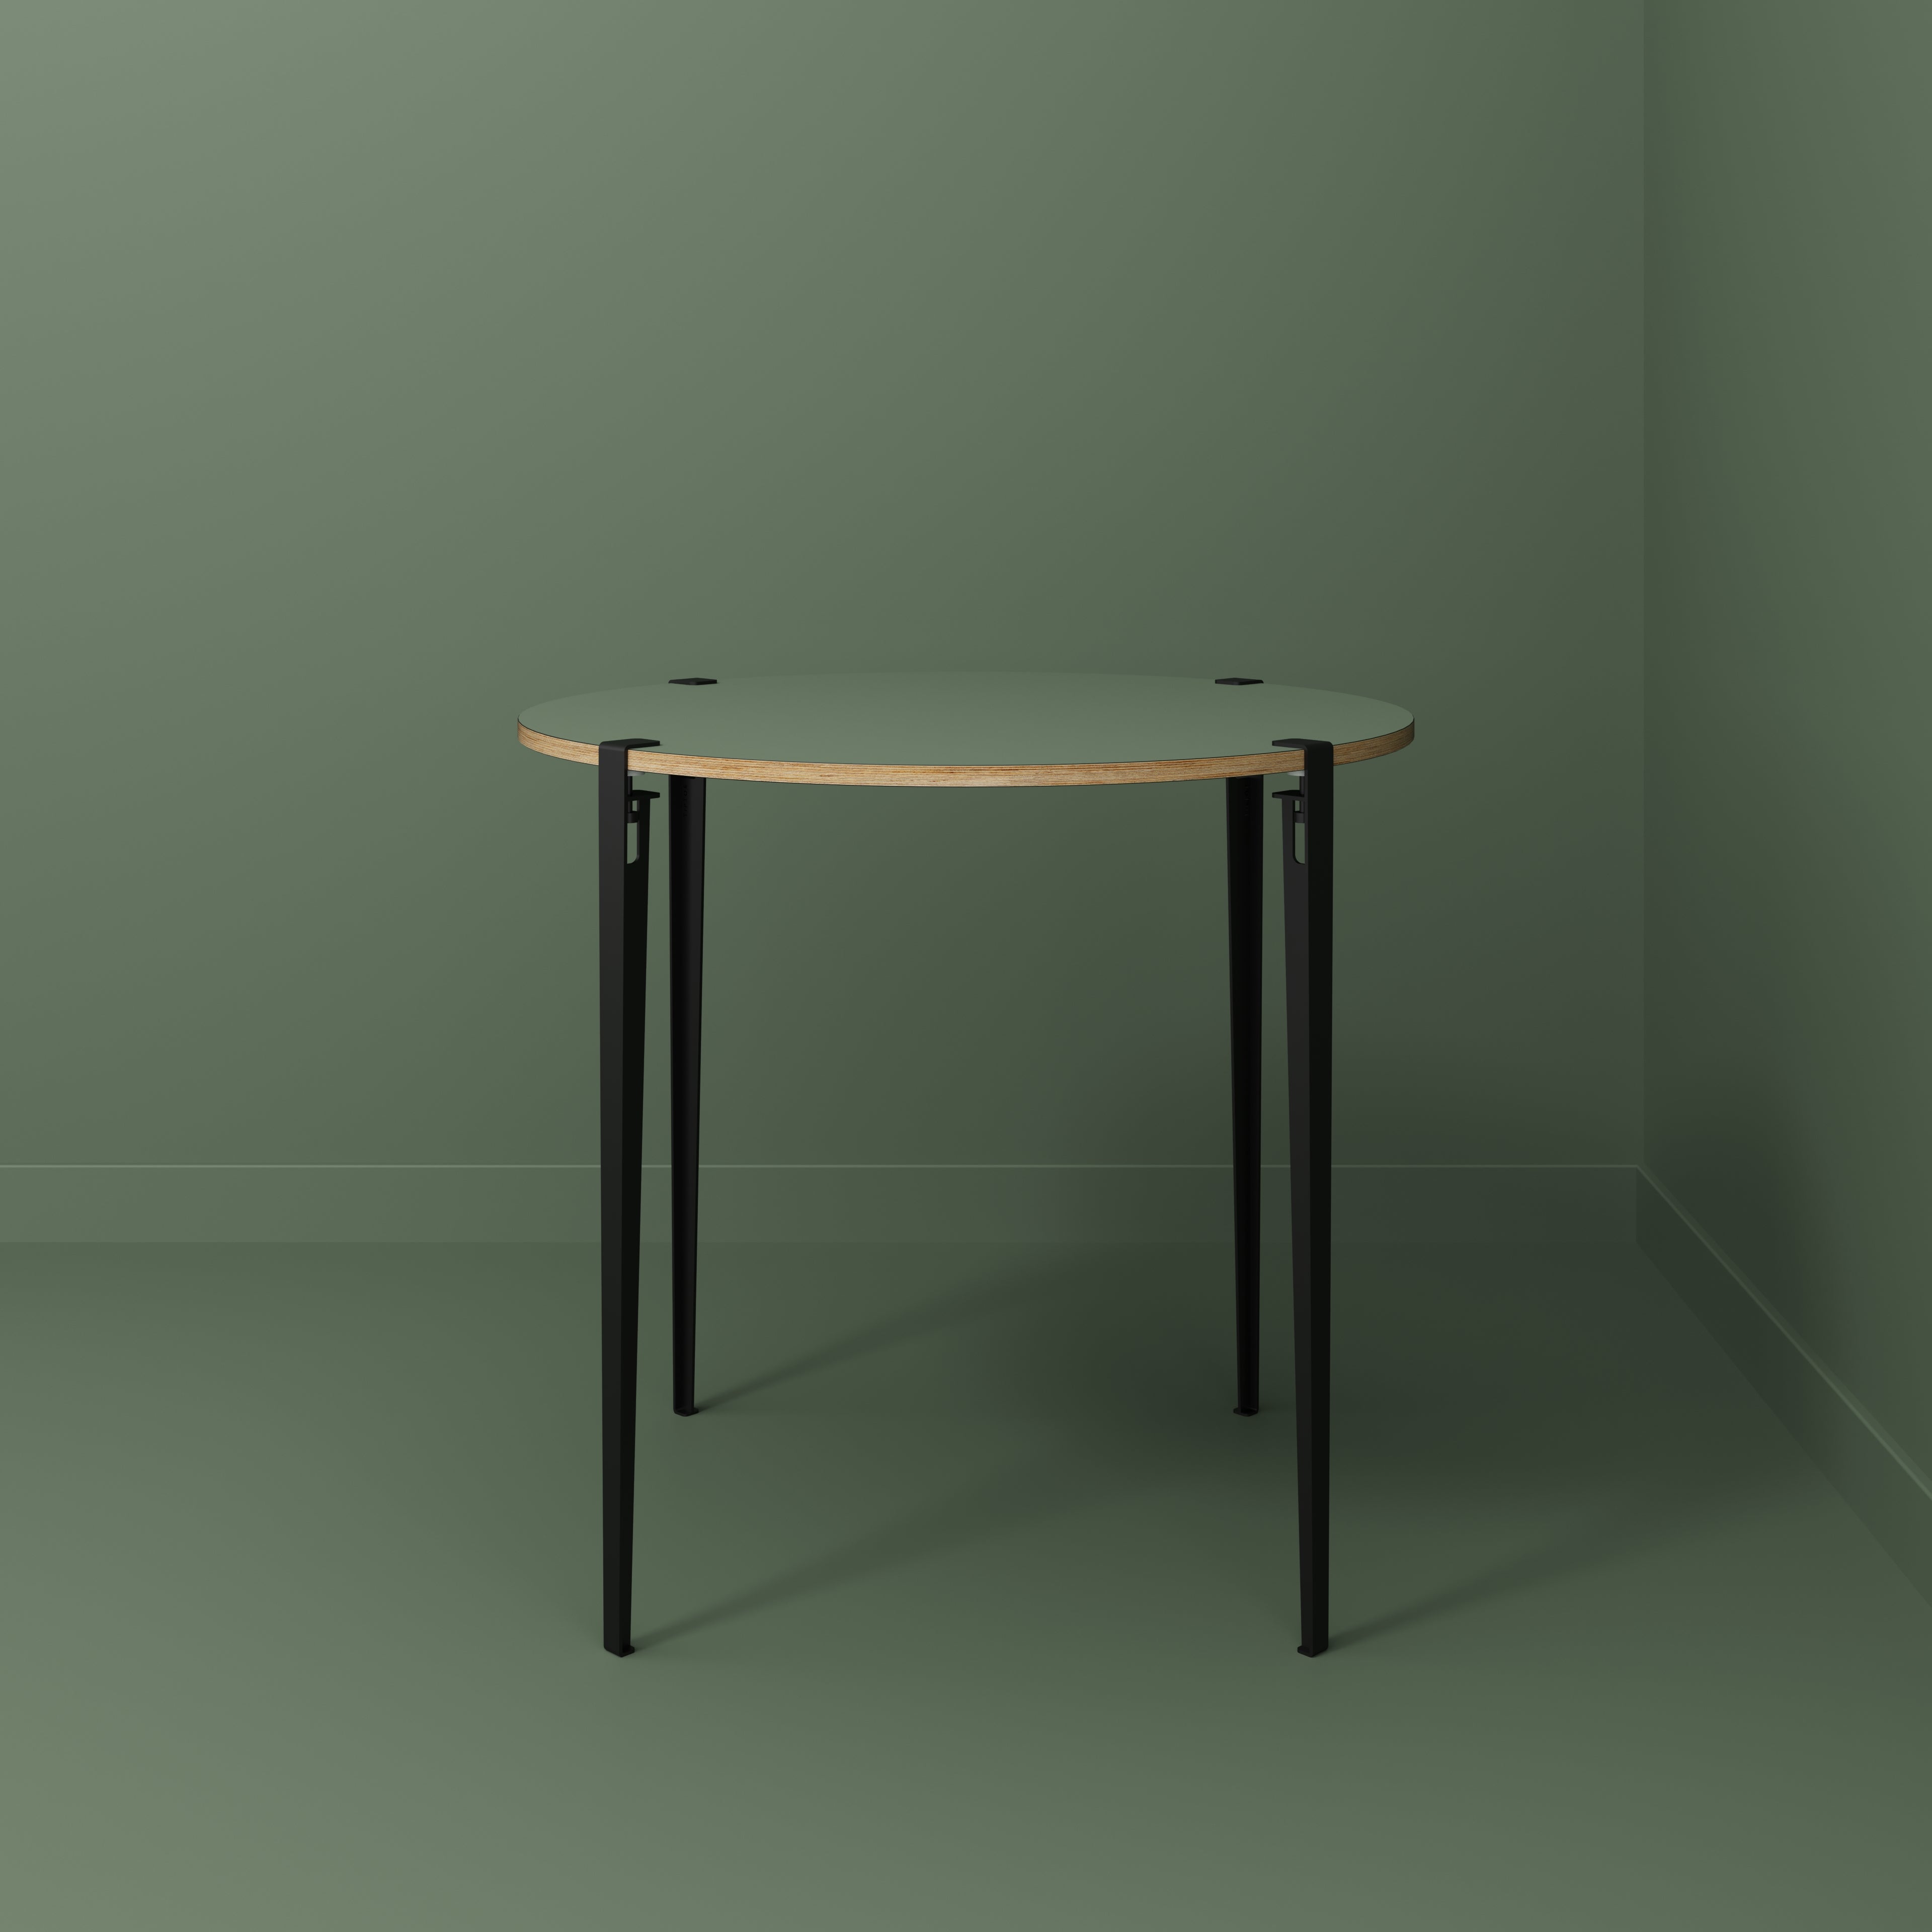 Round Table with Black Tiptoe Legs - Formica Green Slate - 1200(dia) x 1100(h)